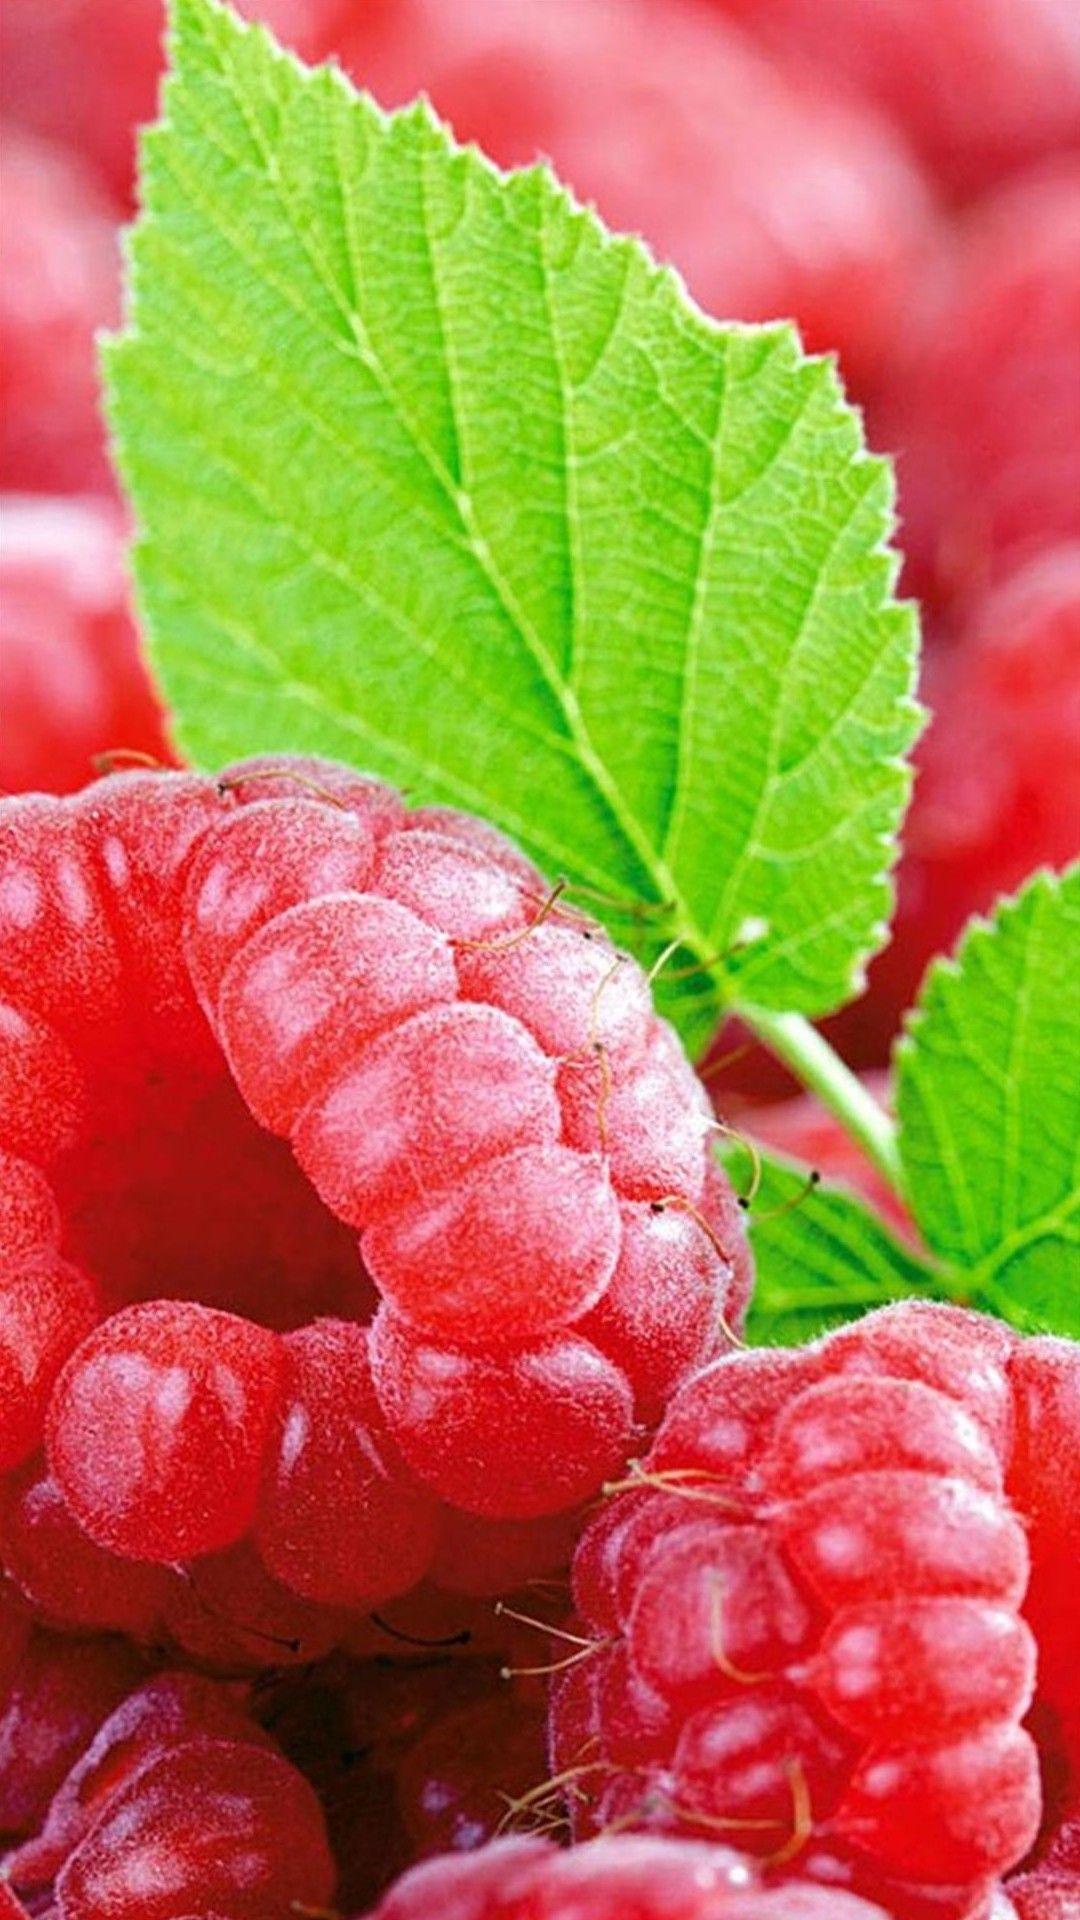 Raspberry fruit htc one wallpaper, free and easy to download